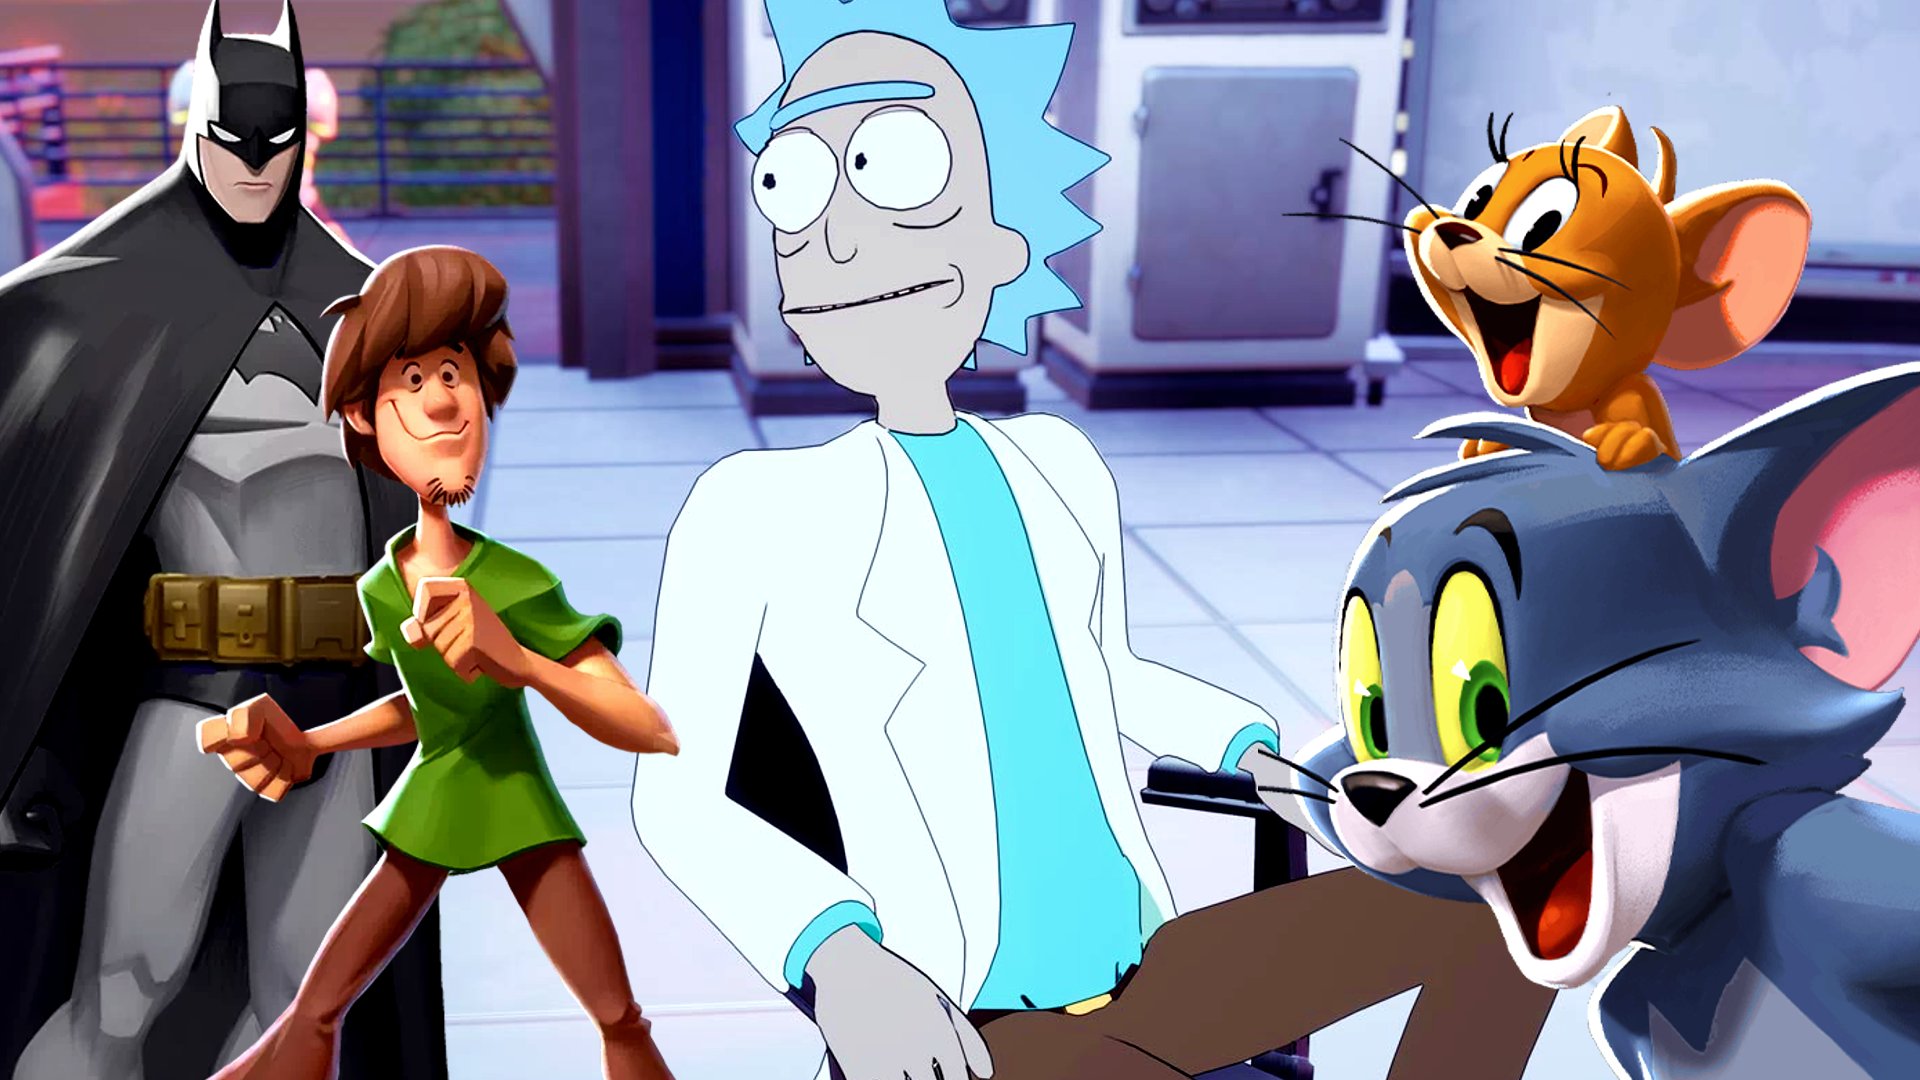 LeBron James, Rick and Morty are coming to fighting game 'MultiVersus